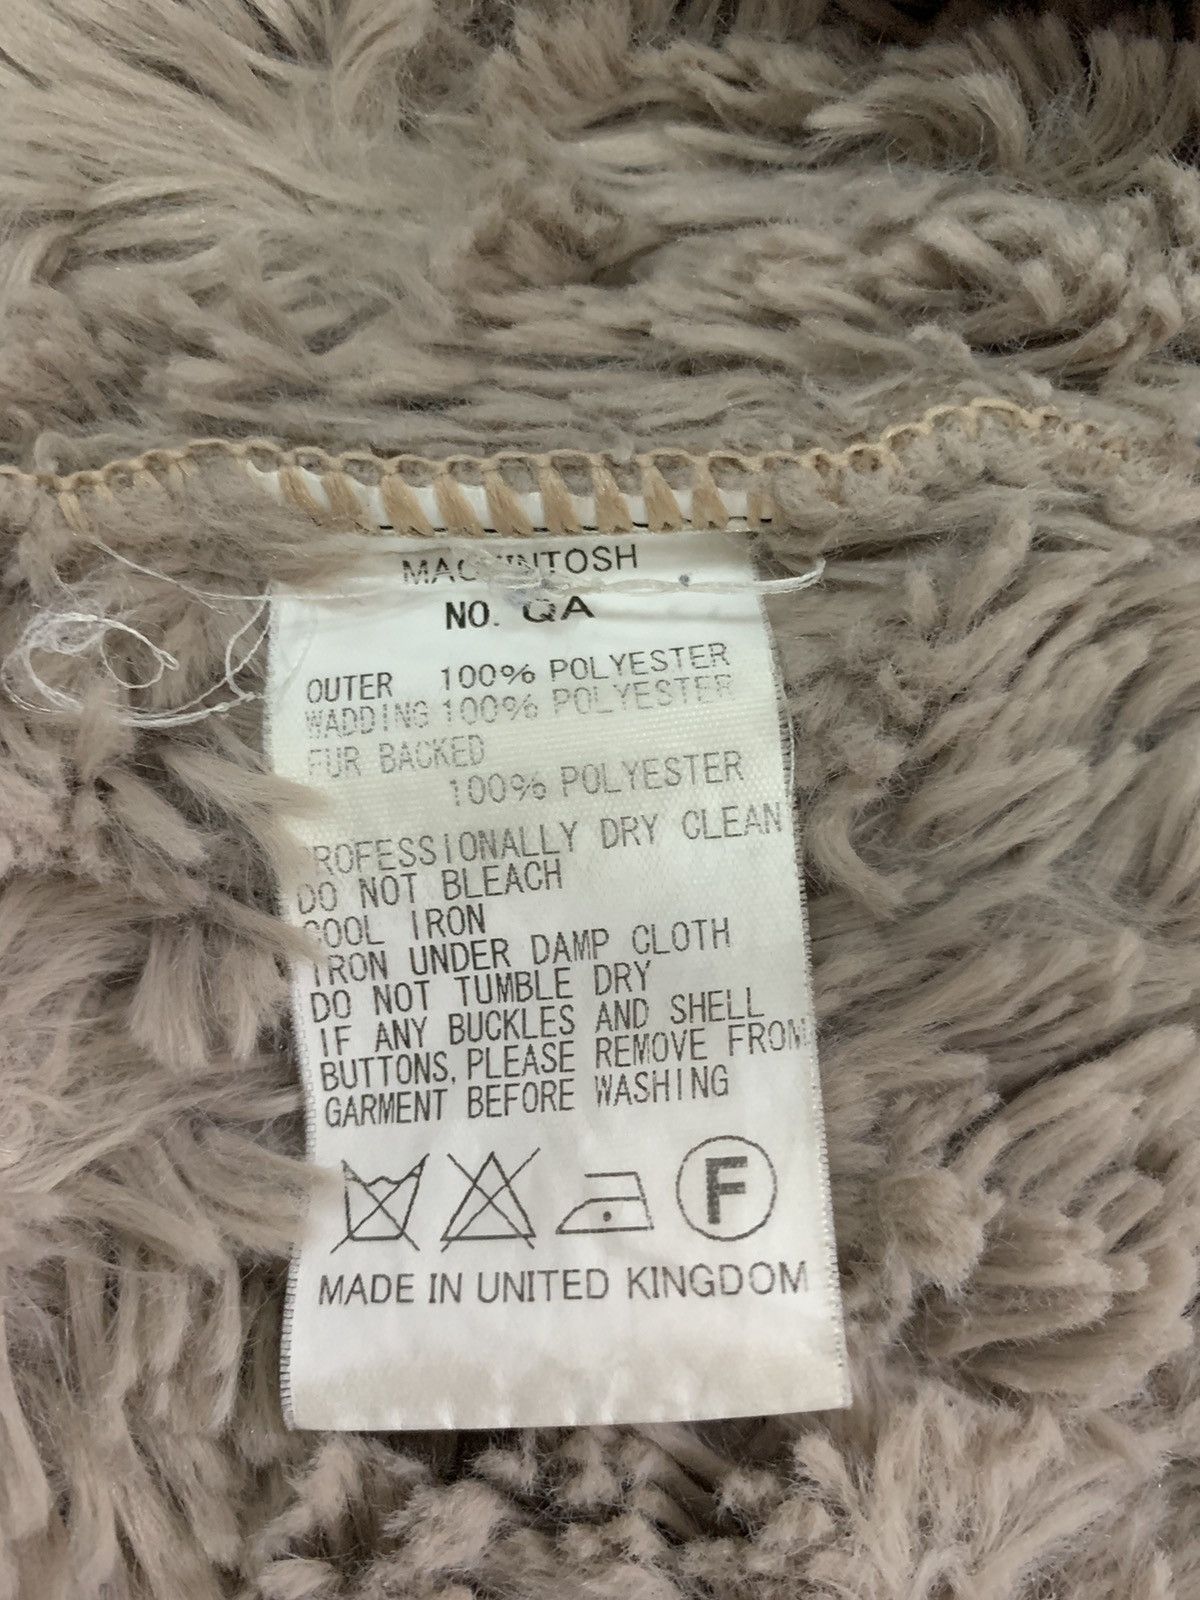 🔥MACKINTOSH SCOTLAND QUILTED FUR LINED LONG JACKETS - 10